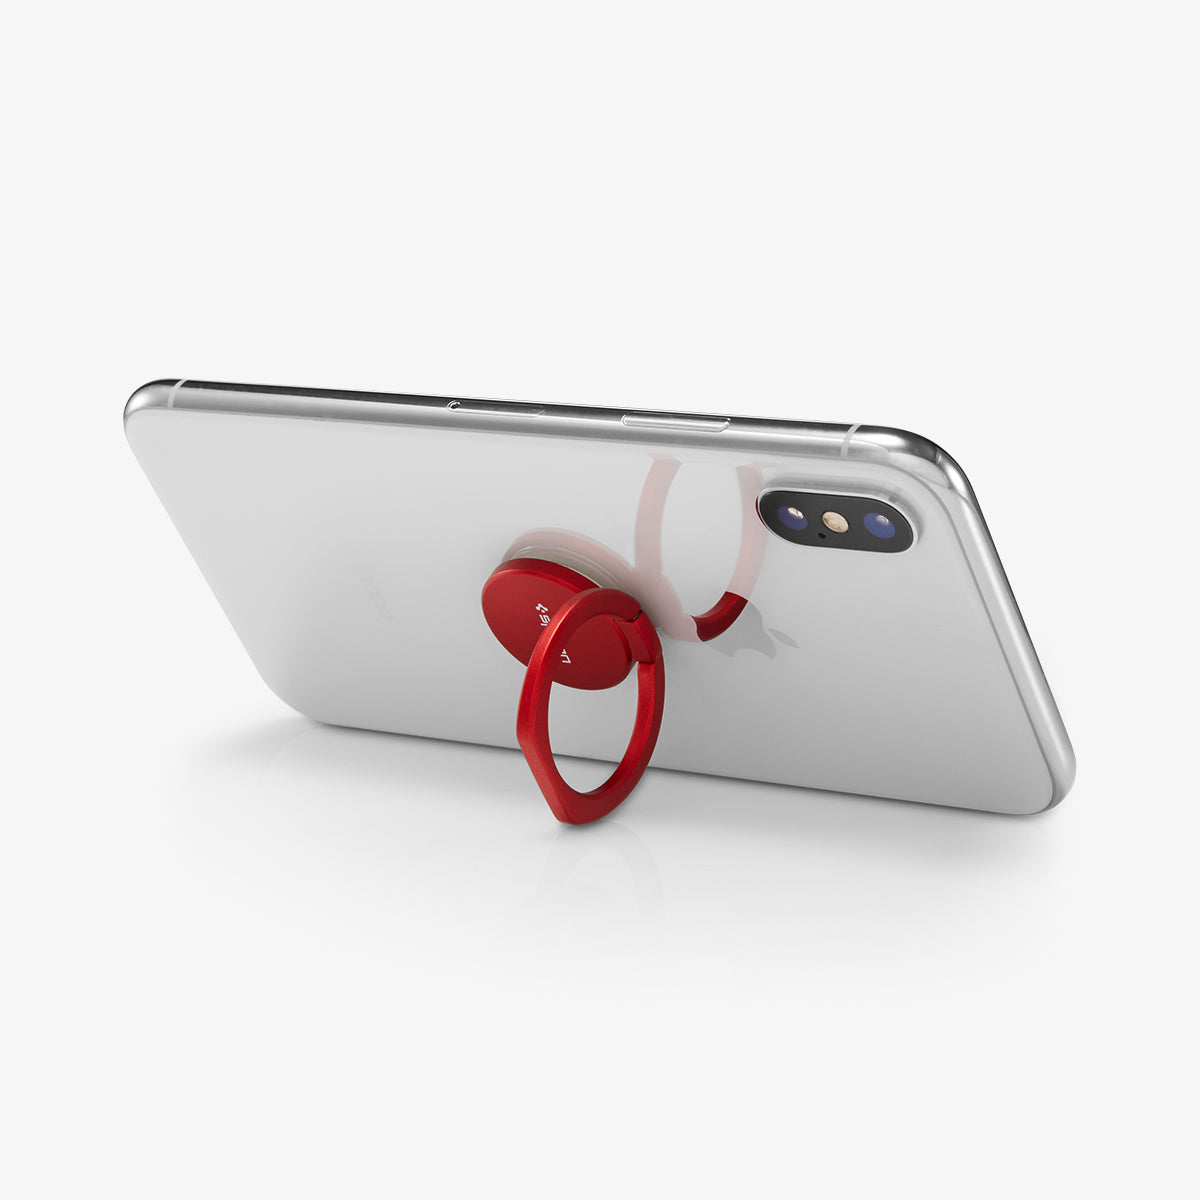 000SR24434 - Style Ring 360 in red showing the phone propped up by ring attached to back of device